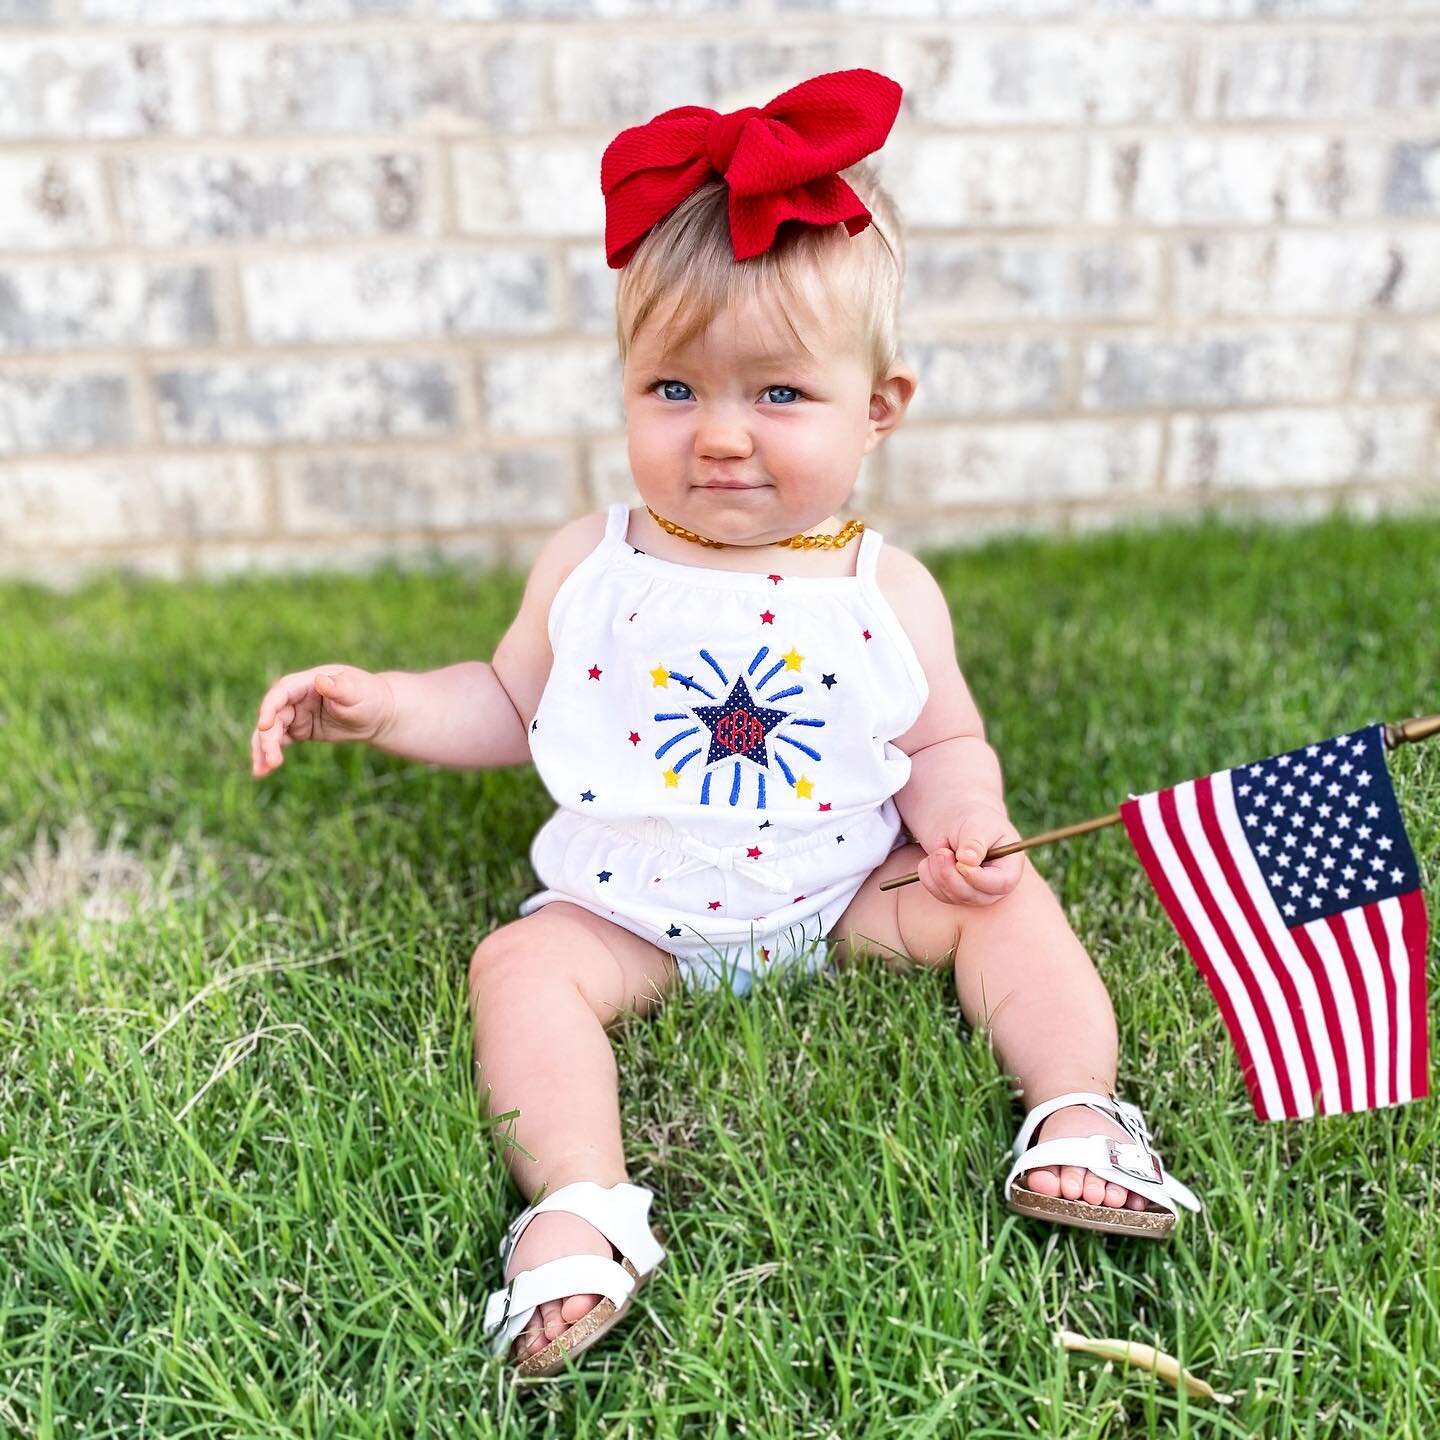 Happy 4th of July from this little firecracker!